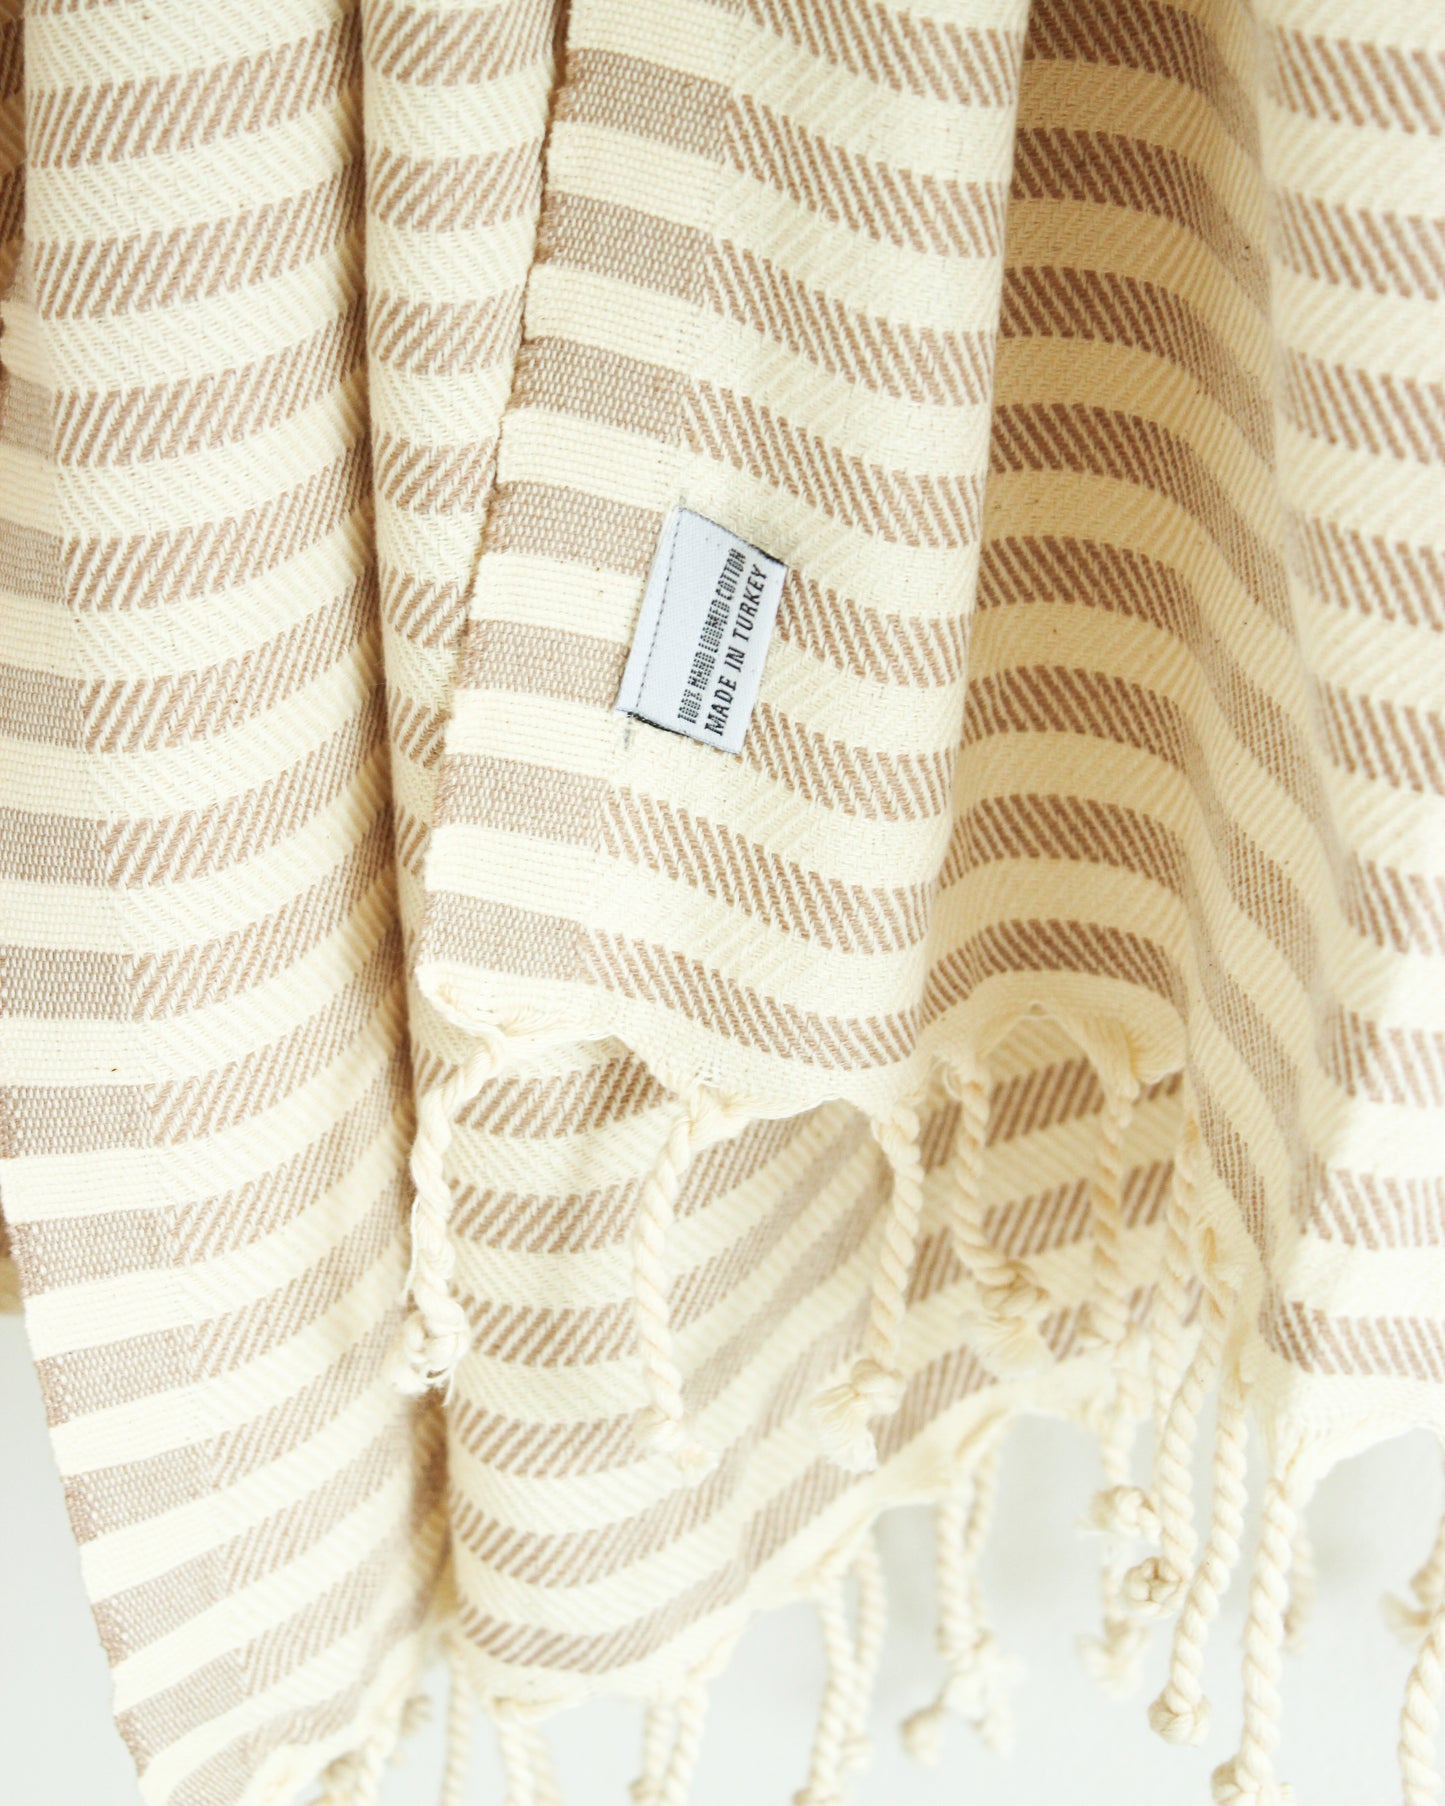 PALM Turkish Towel // Natural with Beige Stripes